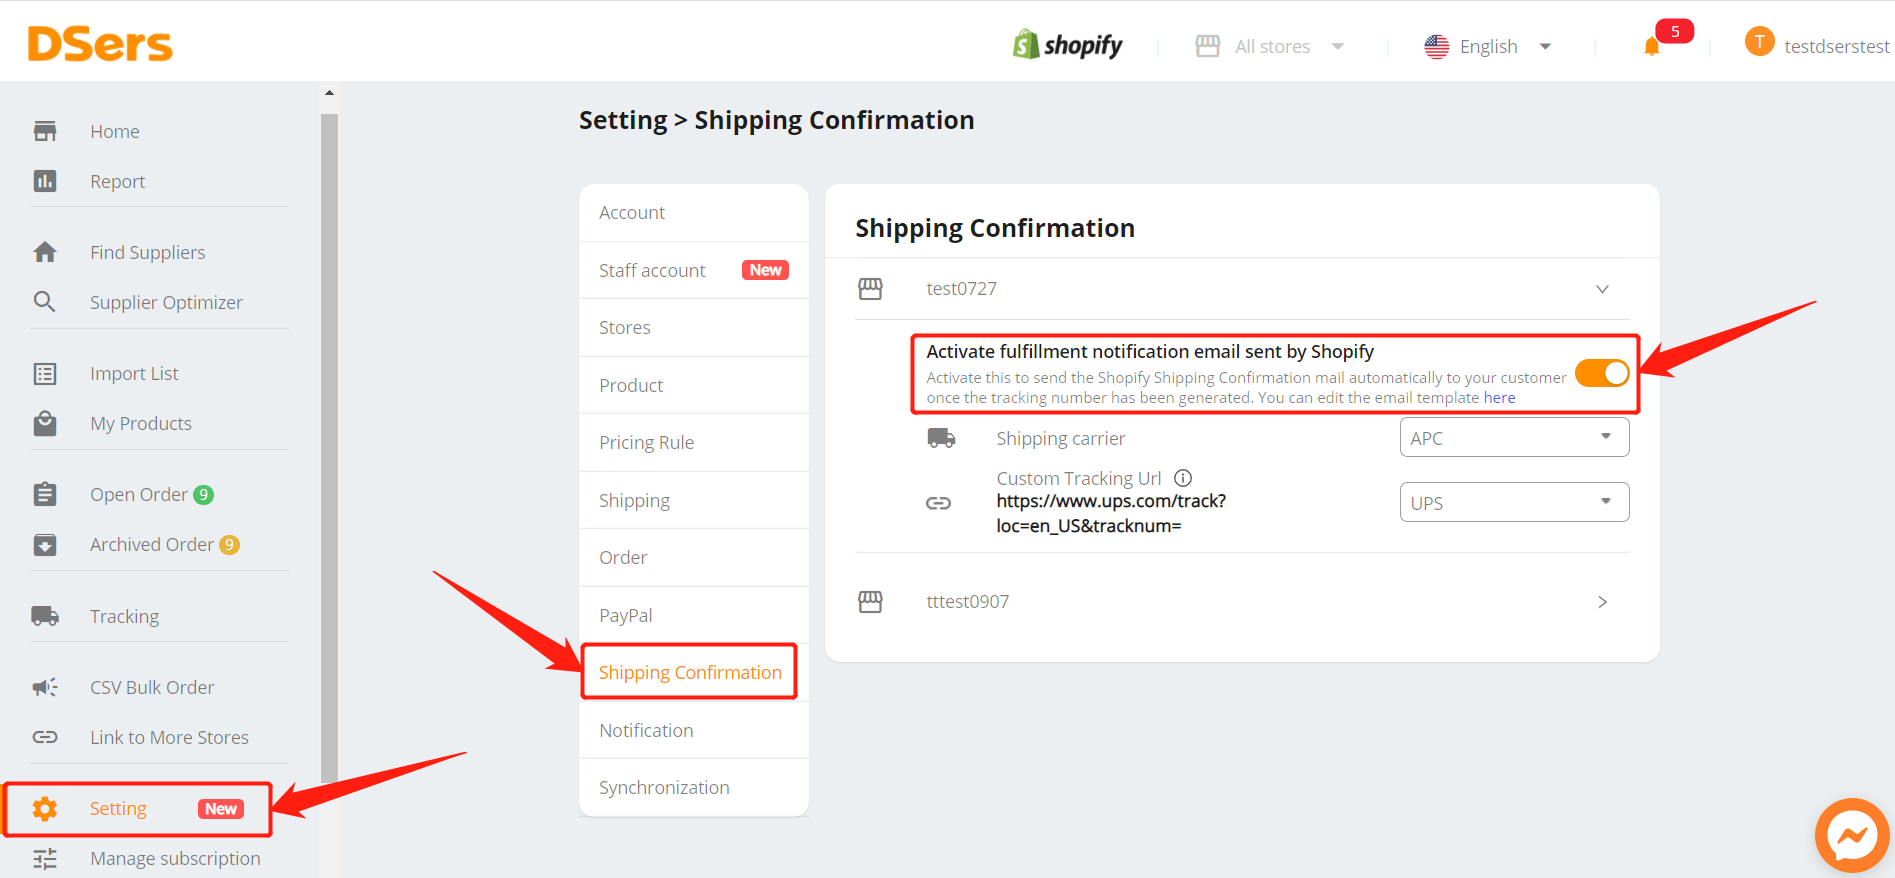 Order status automatic synchronization introduction - DSers - Setting - Shipping Confirmation - Shopify DSers